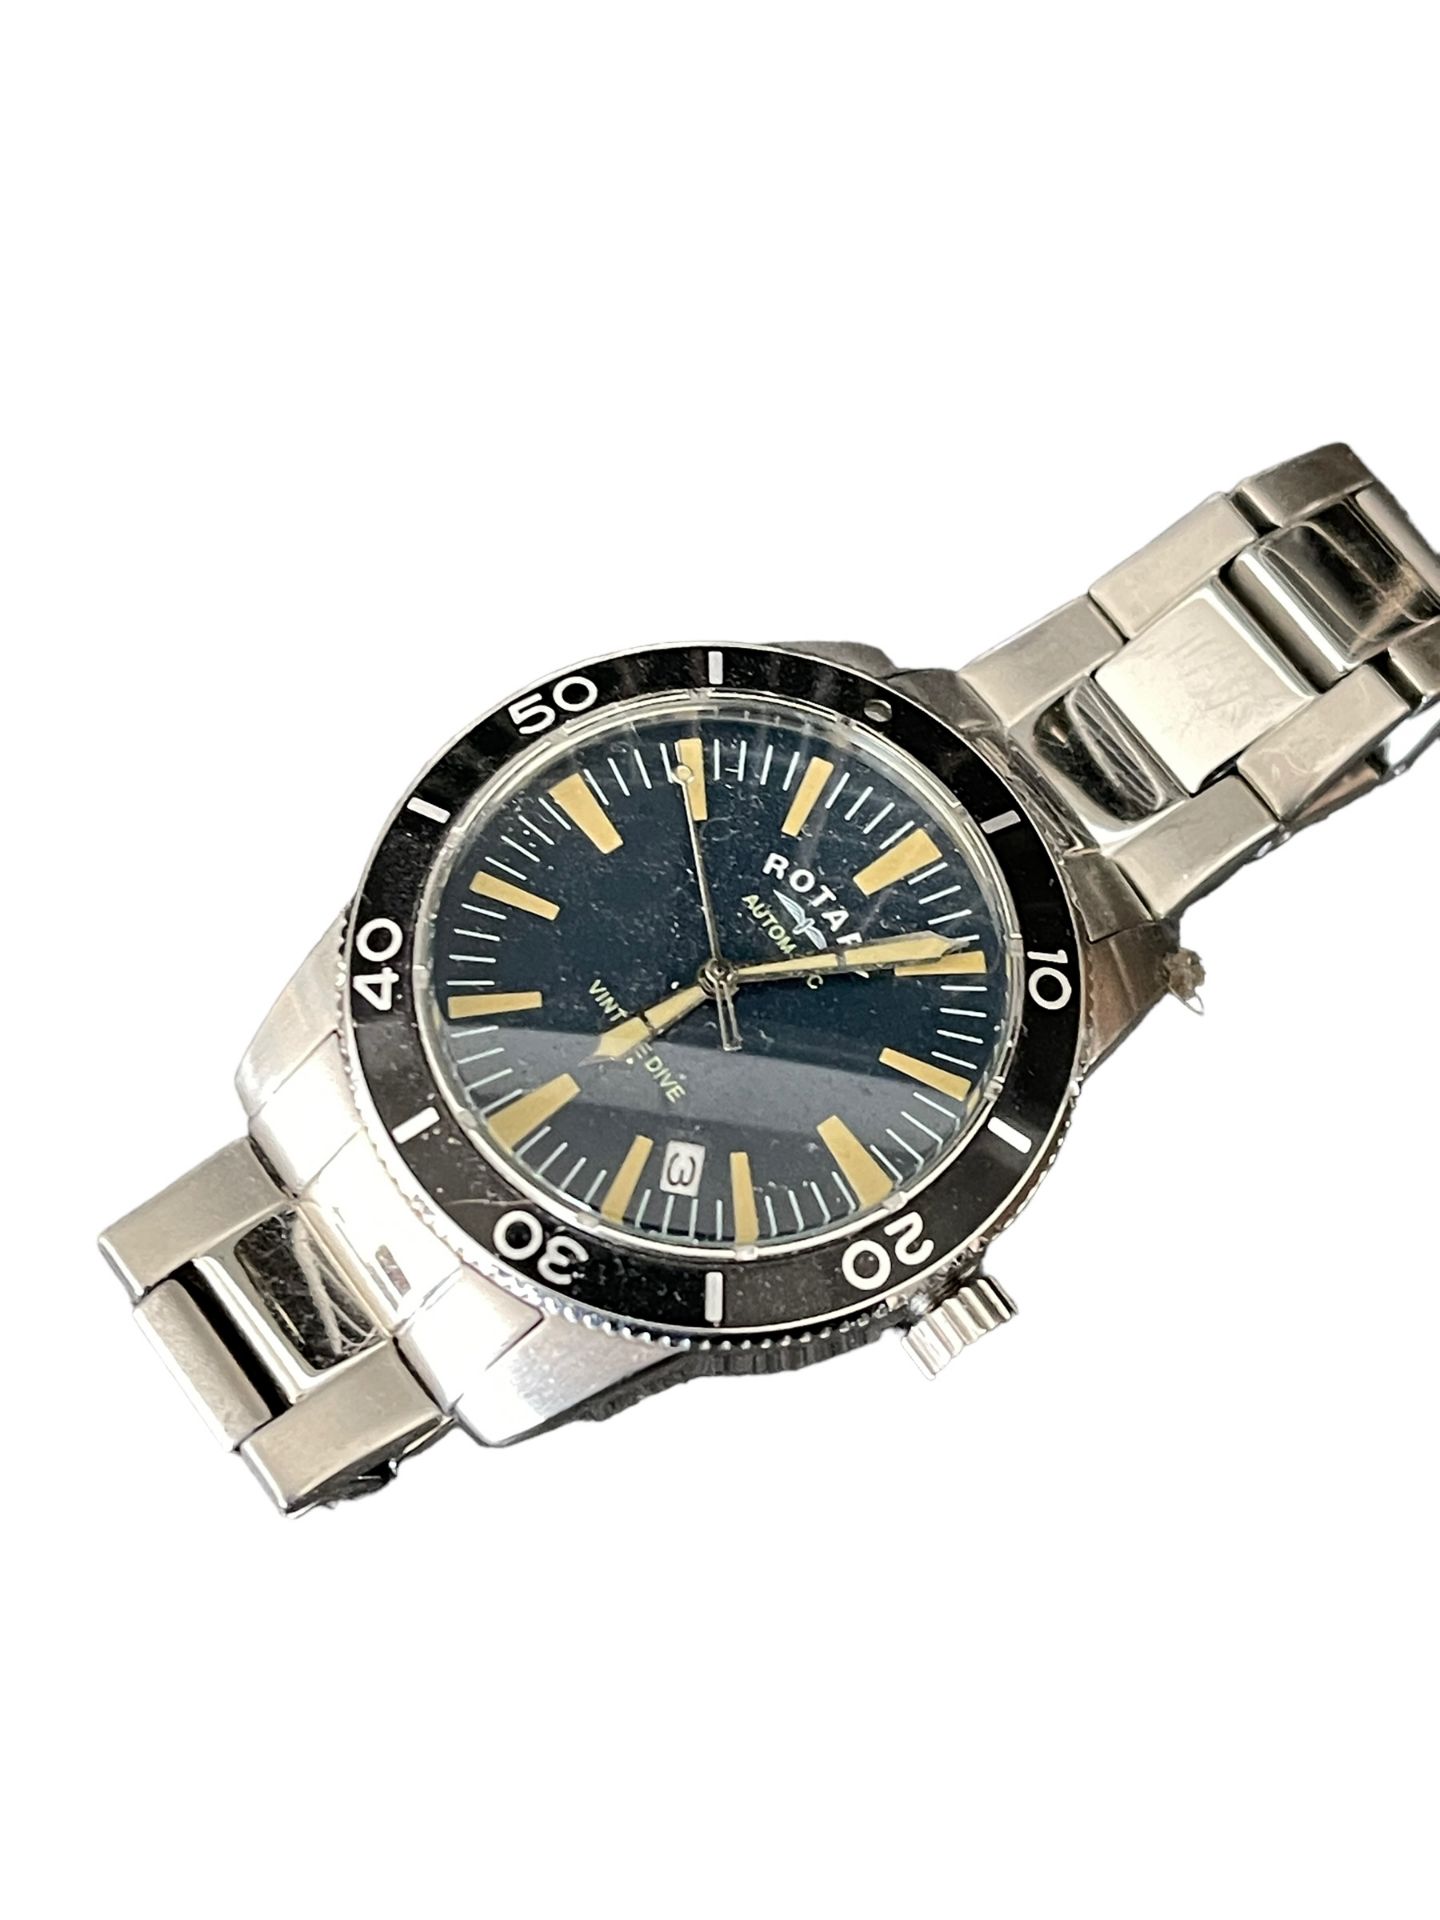 Rotary Divers Watch fully working with box paper bracelet stainless steel - Image 2 of 6